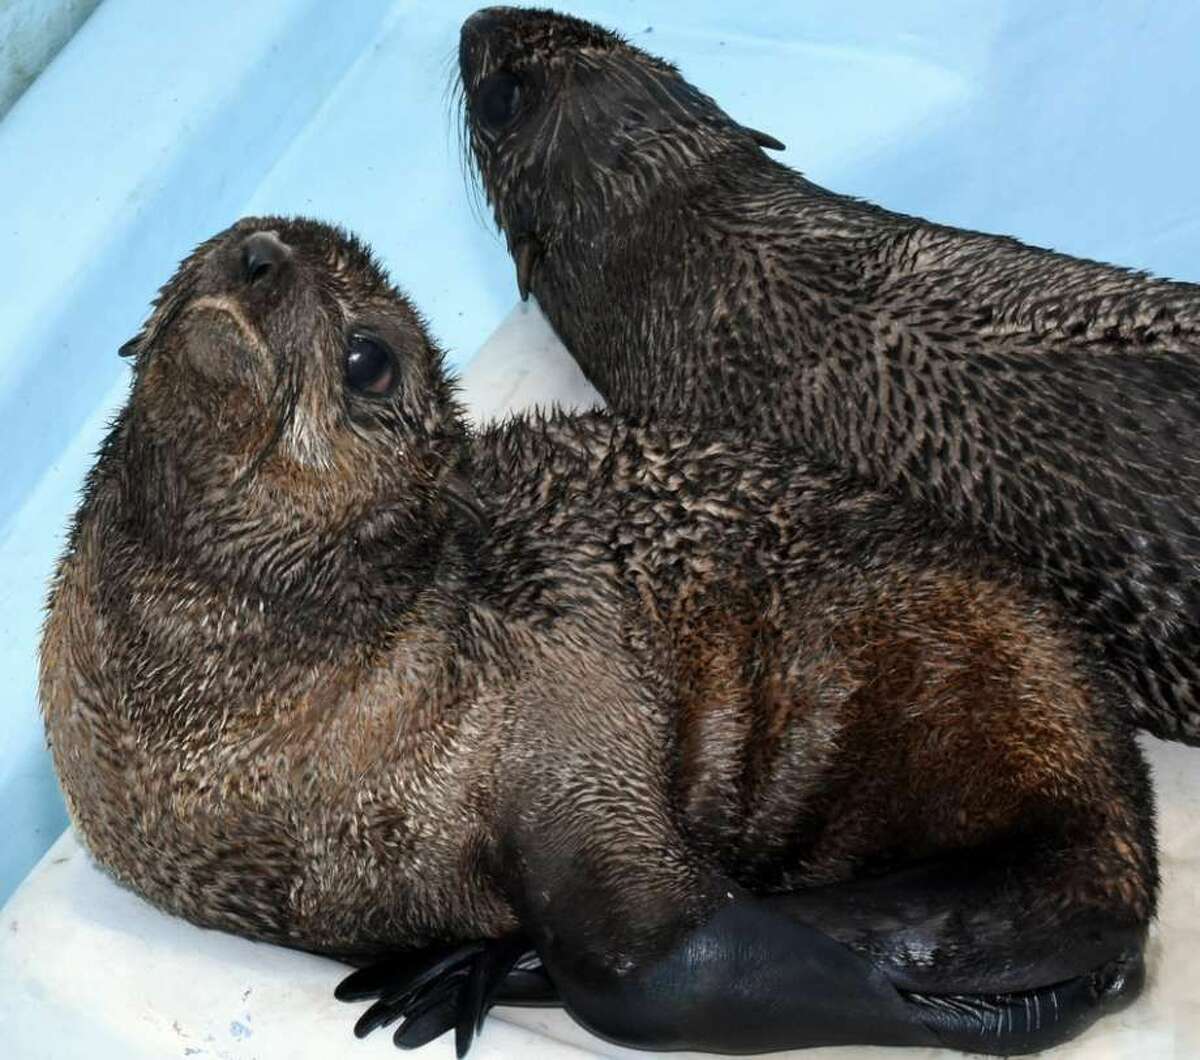 Two Northern fur seal pups have been relocated from the southern California coast to the Mystic Aquarium near the shore of Long Island Sound. The seal pups, named Pup XCu31 and Pup XCu32, had some kind of difficulties eating in the Pacific Ocean. If the two seals were released into the Pacific Ocean, it’s likely they wouldn’t survive. (Photo: Contributed)